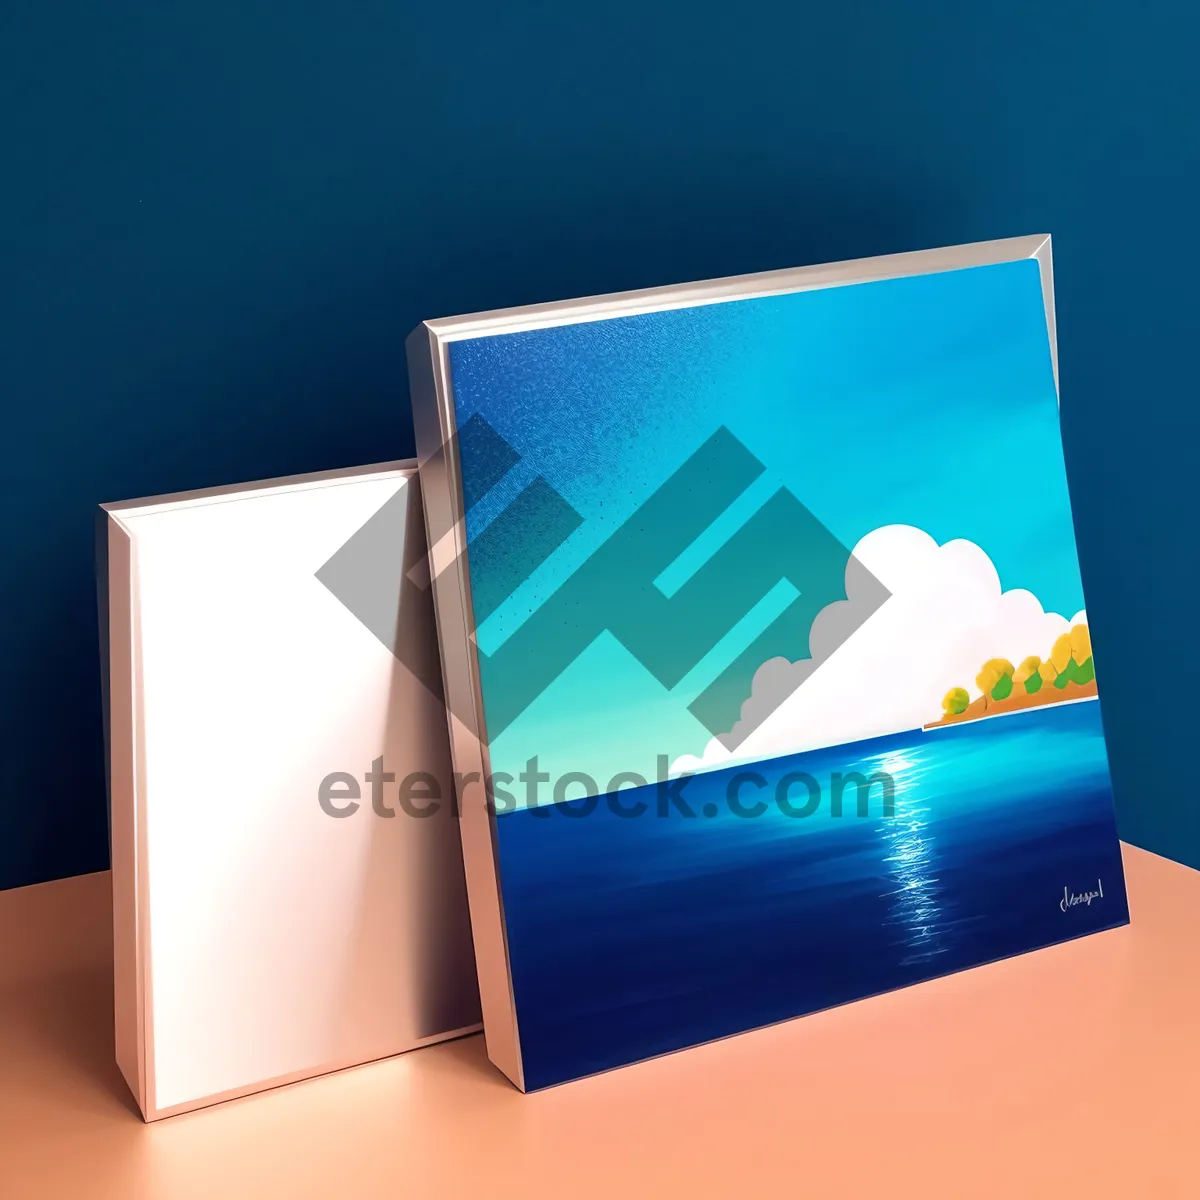 Picture of Digital Design: 3D Blank Business Icon on Glass Screen